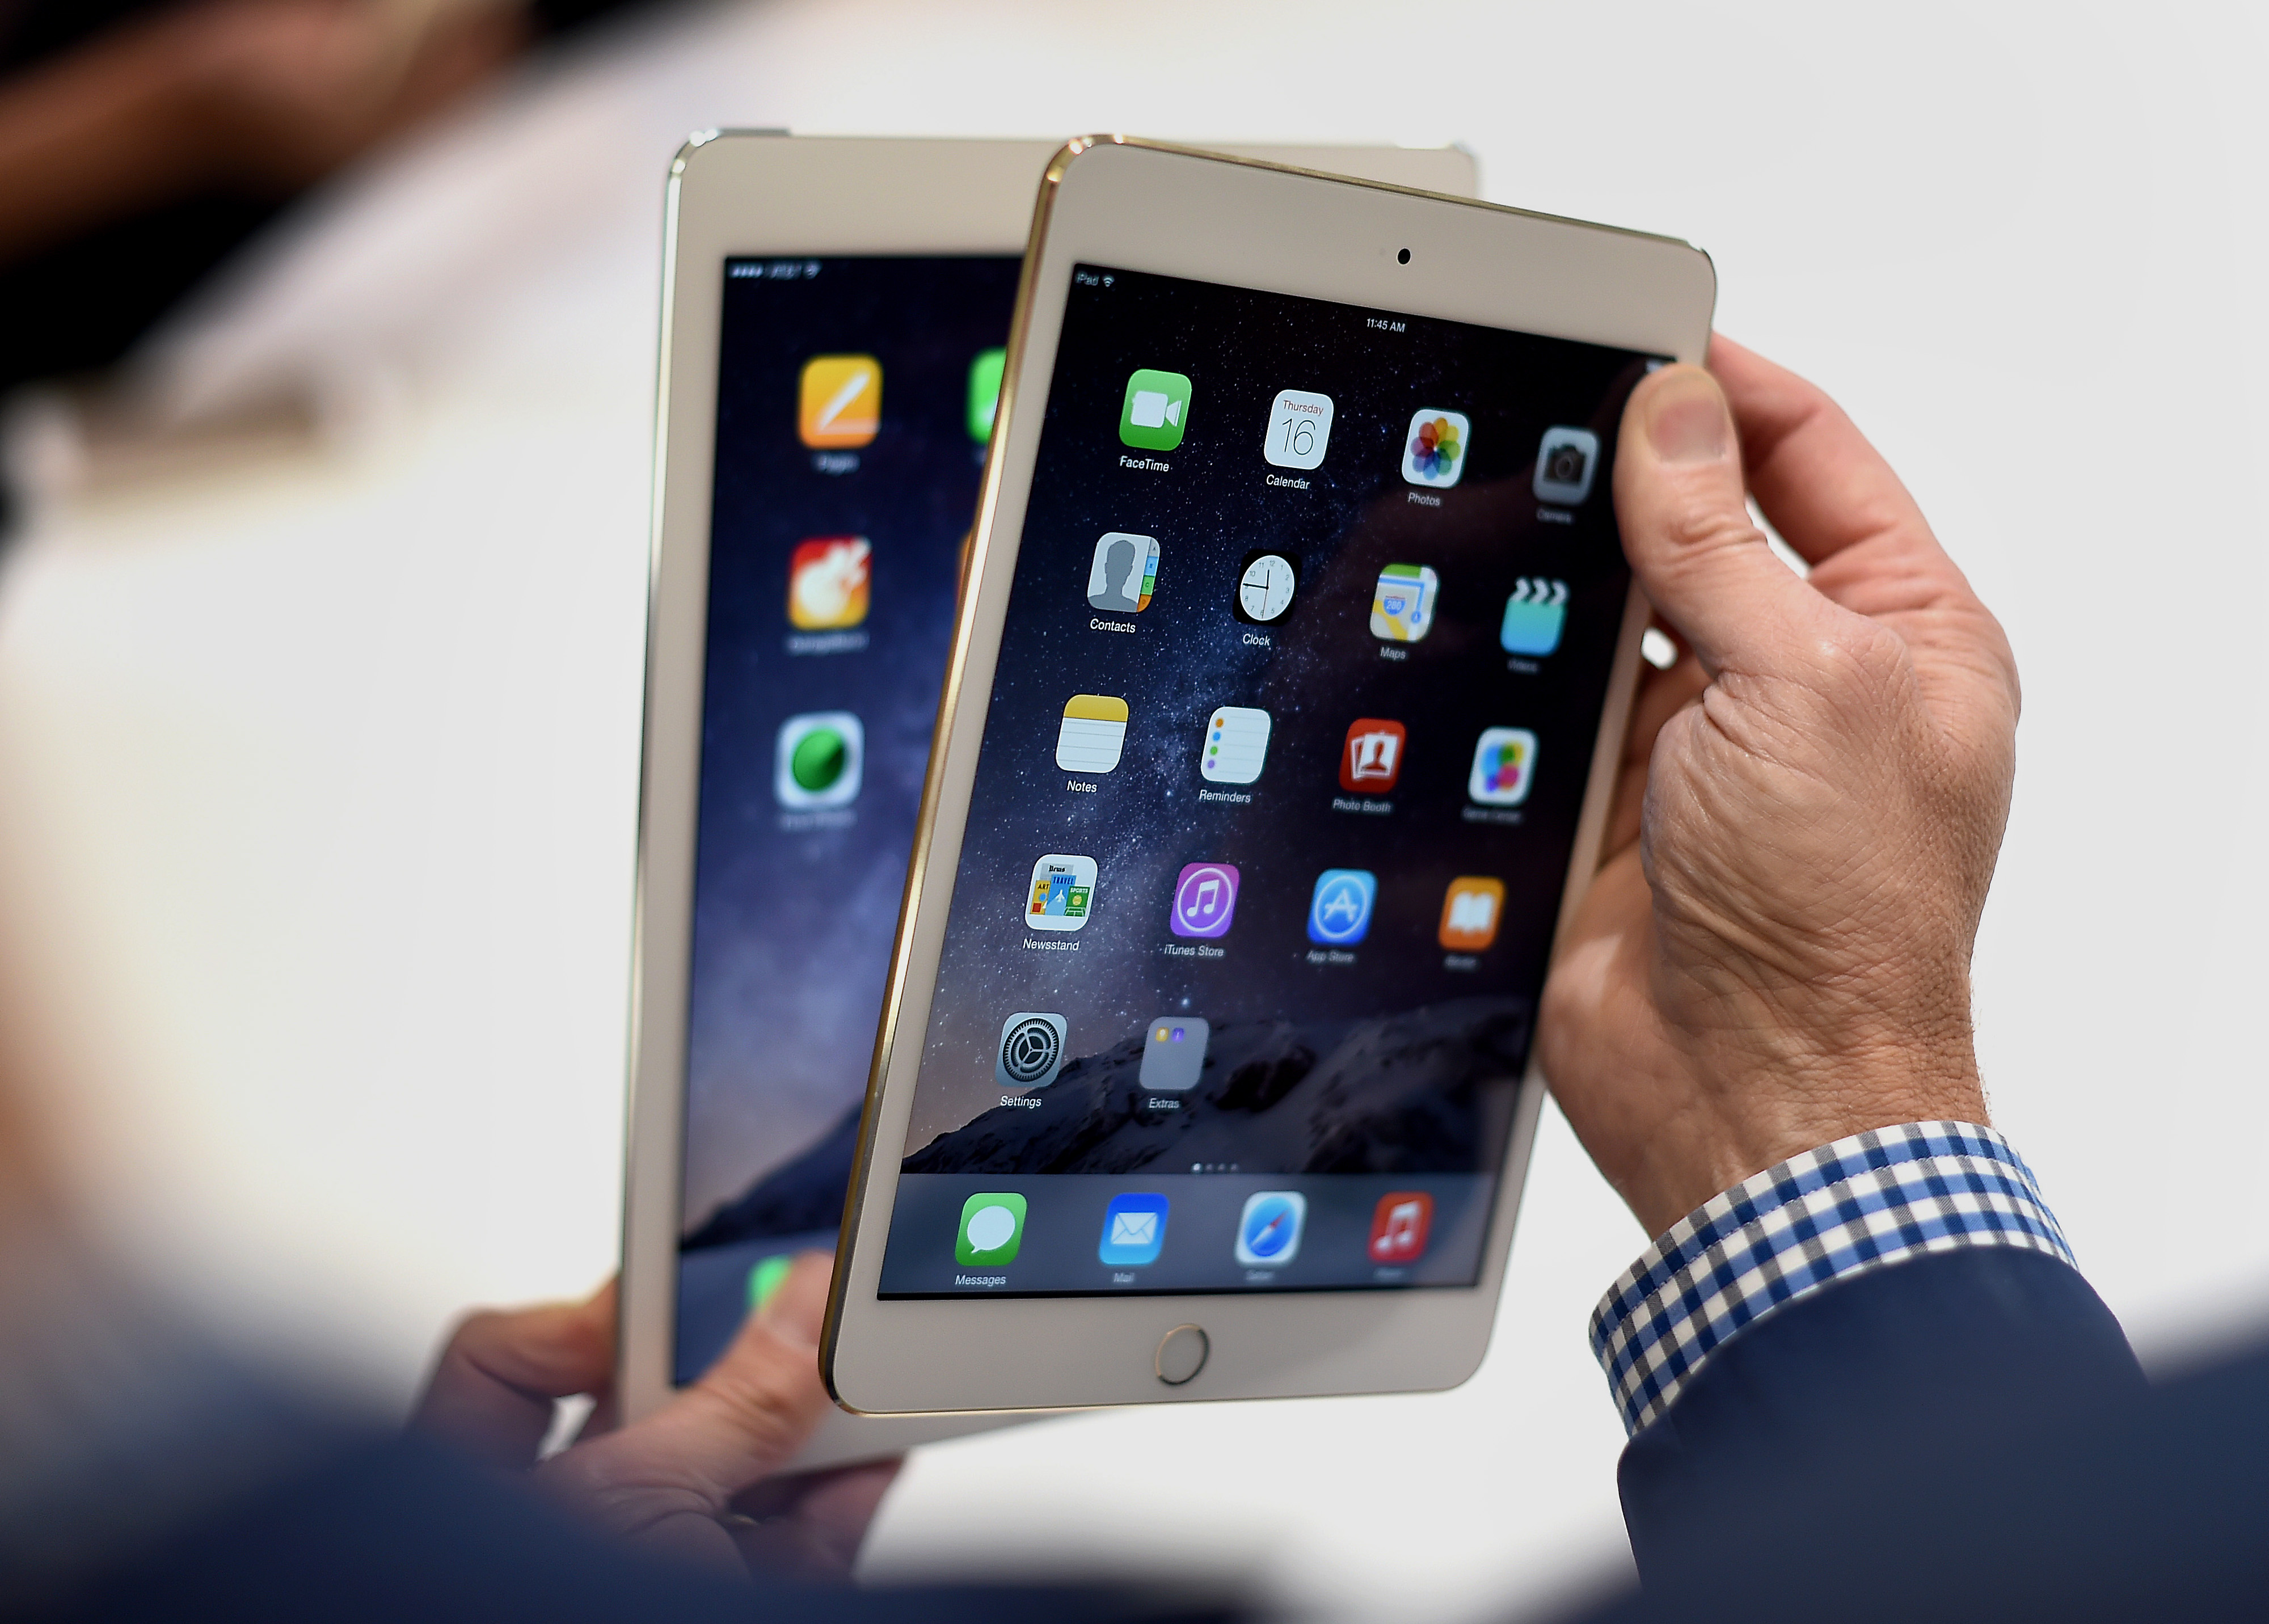 A member of the media displays an Apple Inc. iPad Mini 3, left, and iPad Air 2 for a photograph after a product announcement in Cupertino, California, U.S., on Thursday, Oct. 16, 2014. (Bloomberg&mdash;Bloomberg via Getty Images)